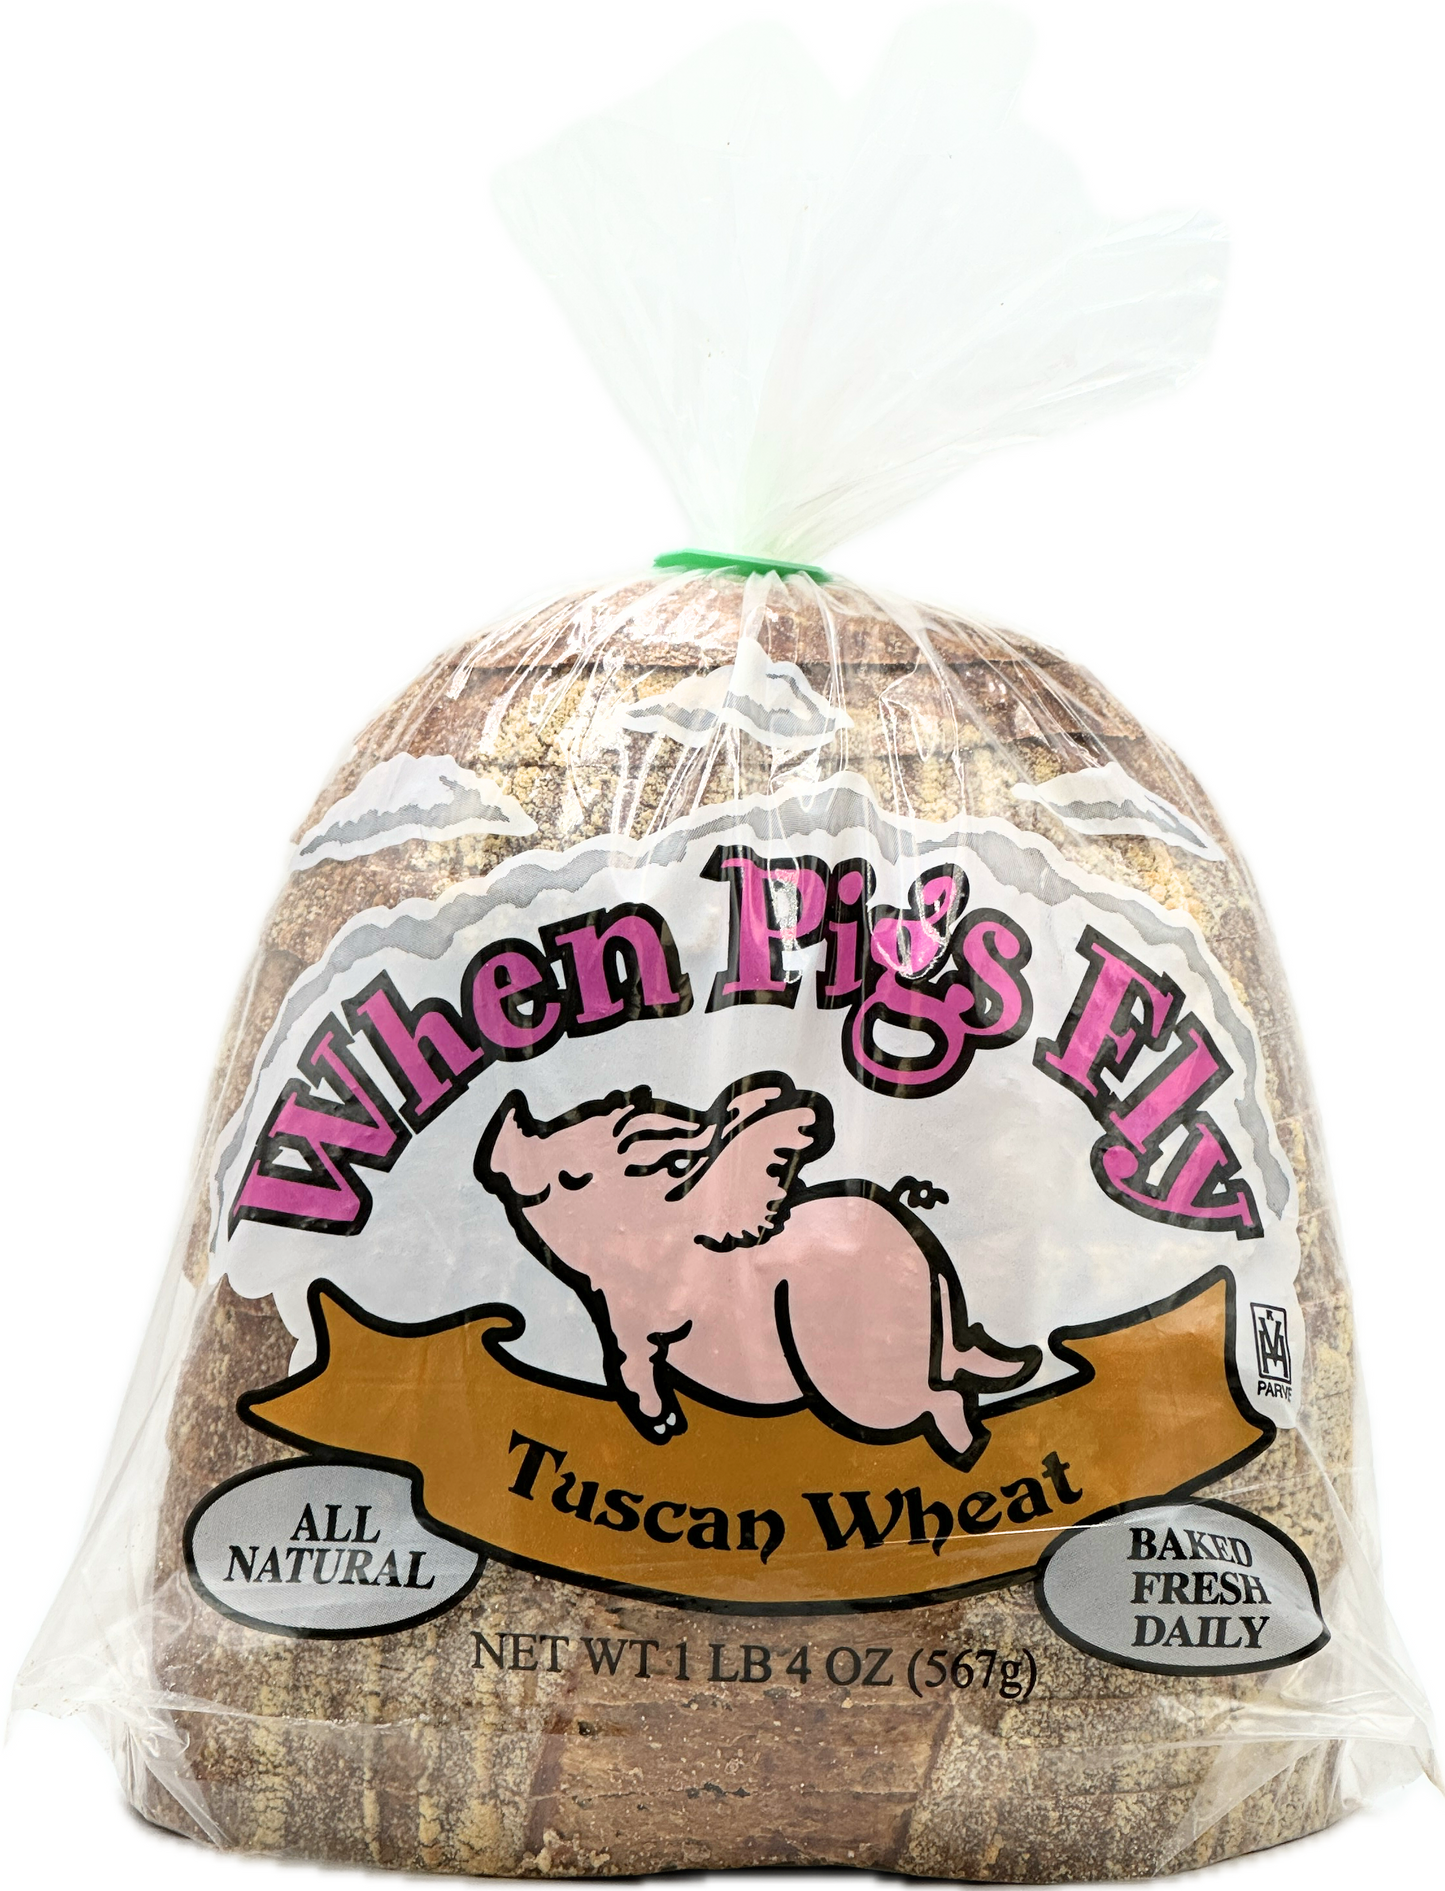 When Pigs Fly Sourdough Breads Tuscan Wheat Bread